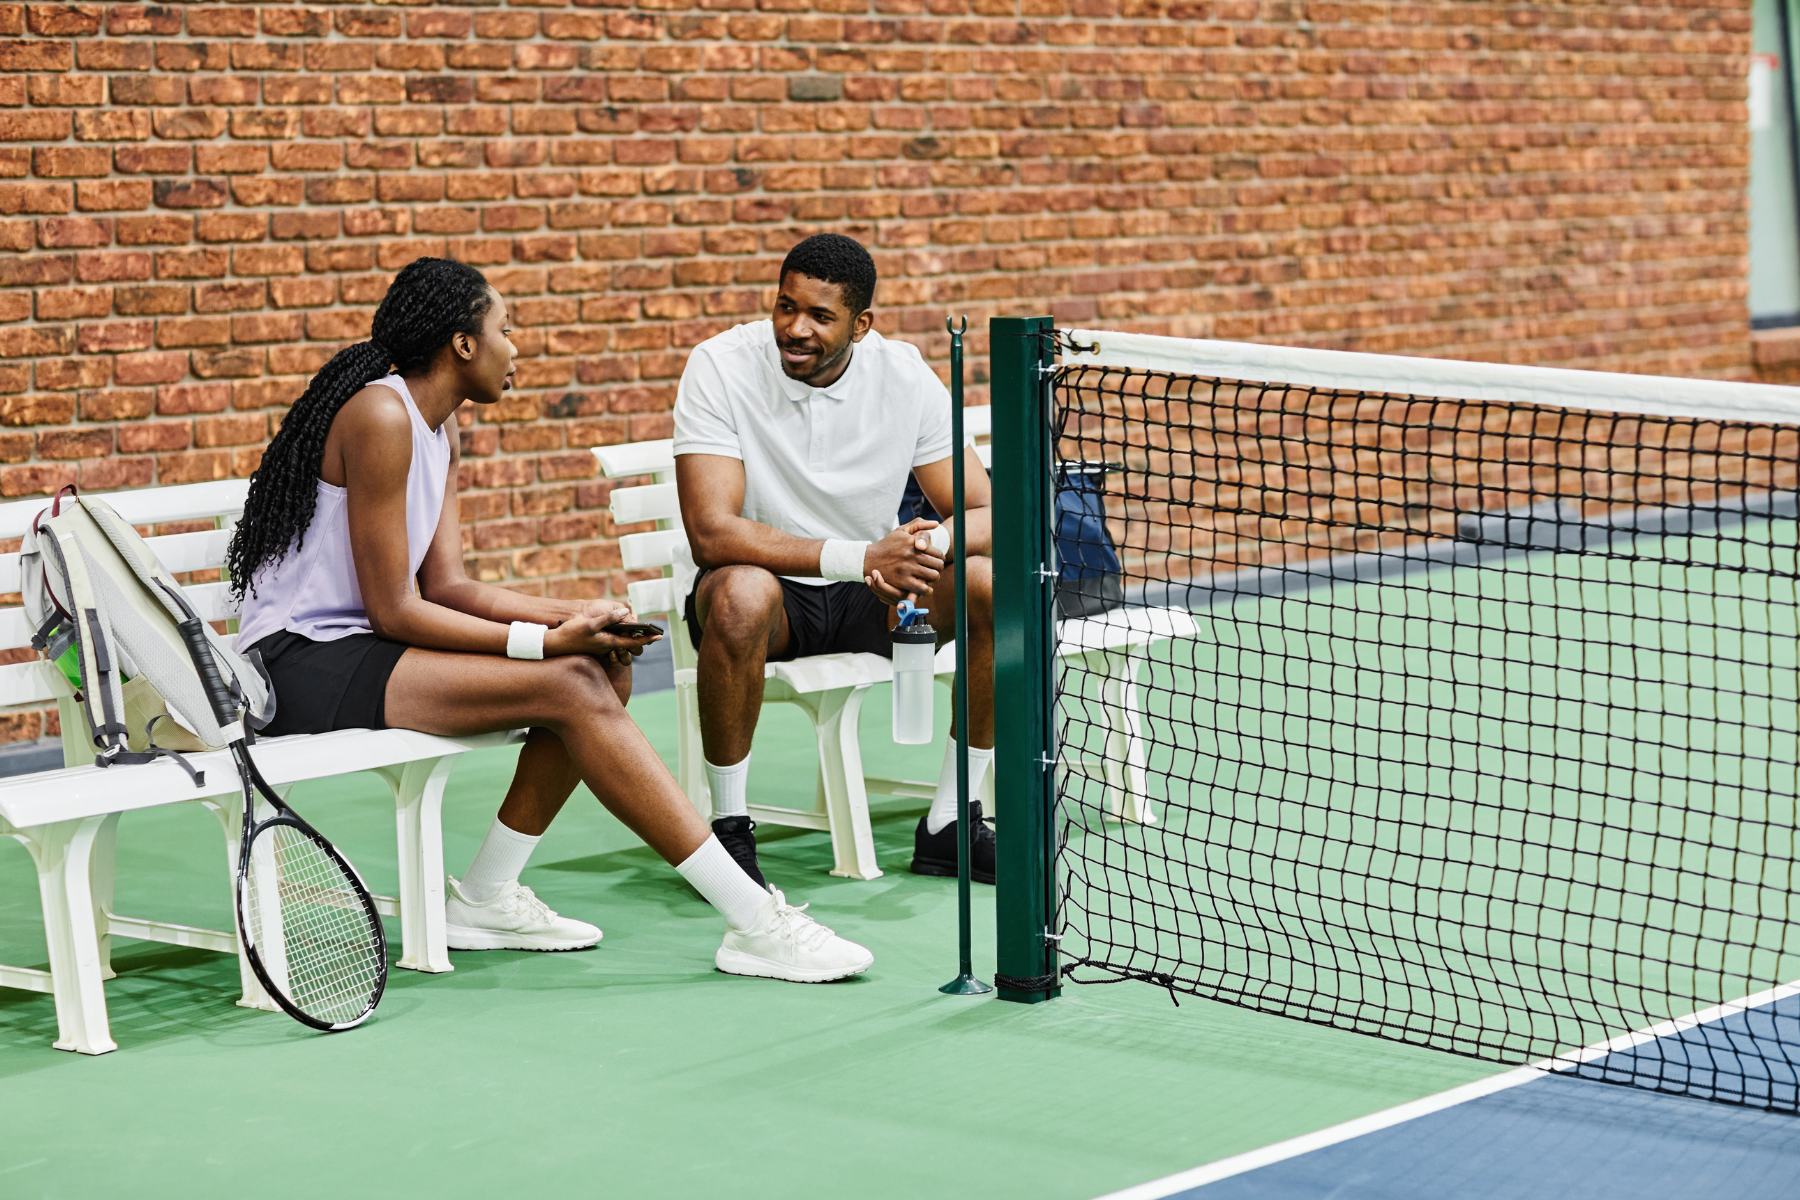 man and woman sitting on bench next to tennis court talking